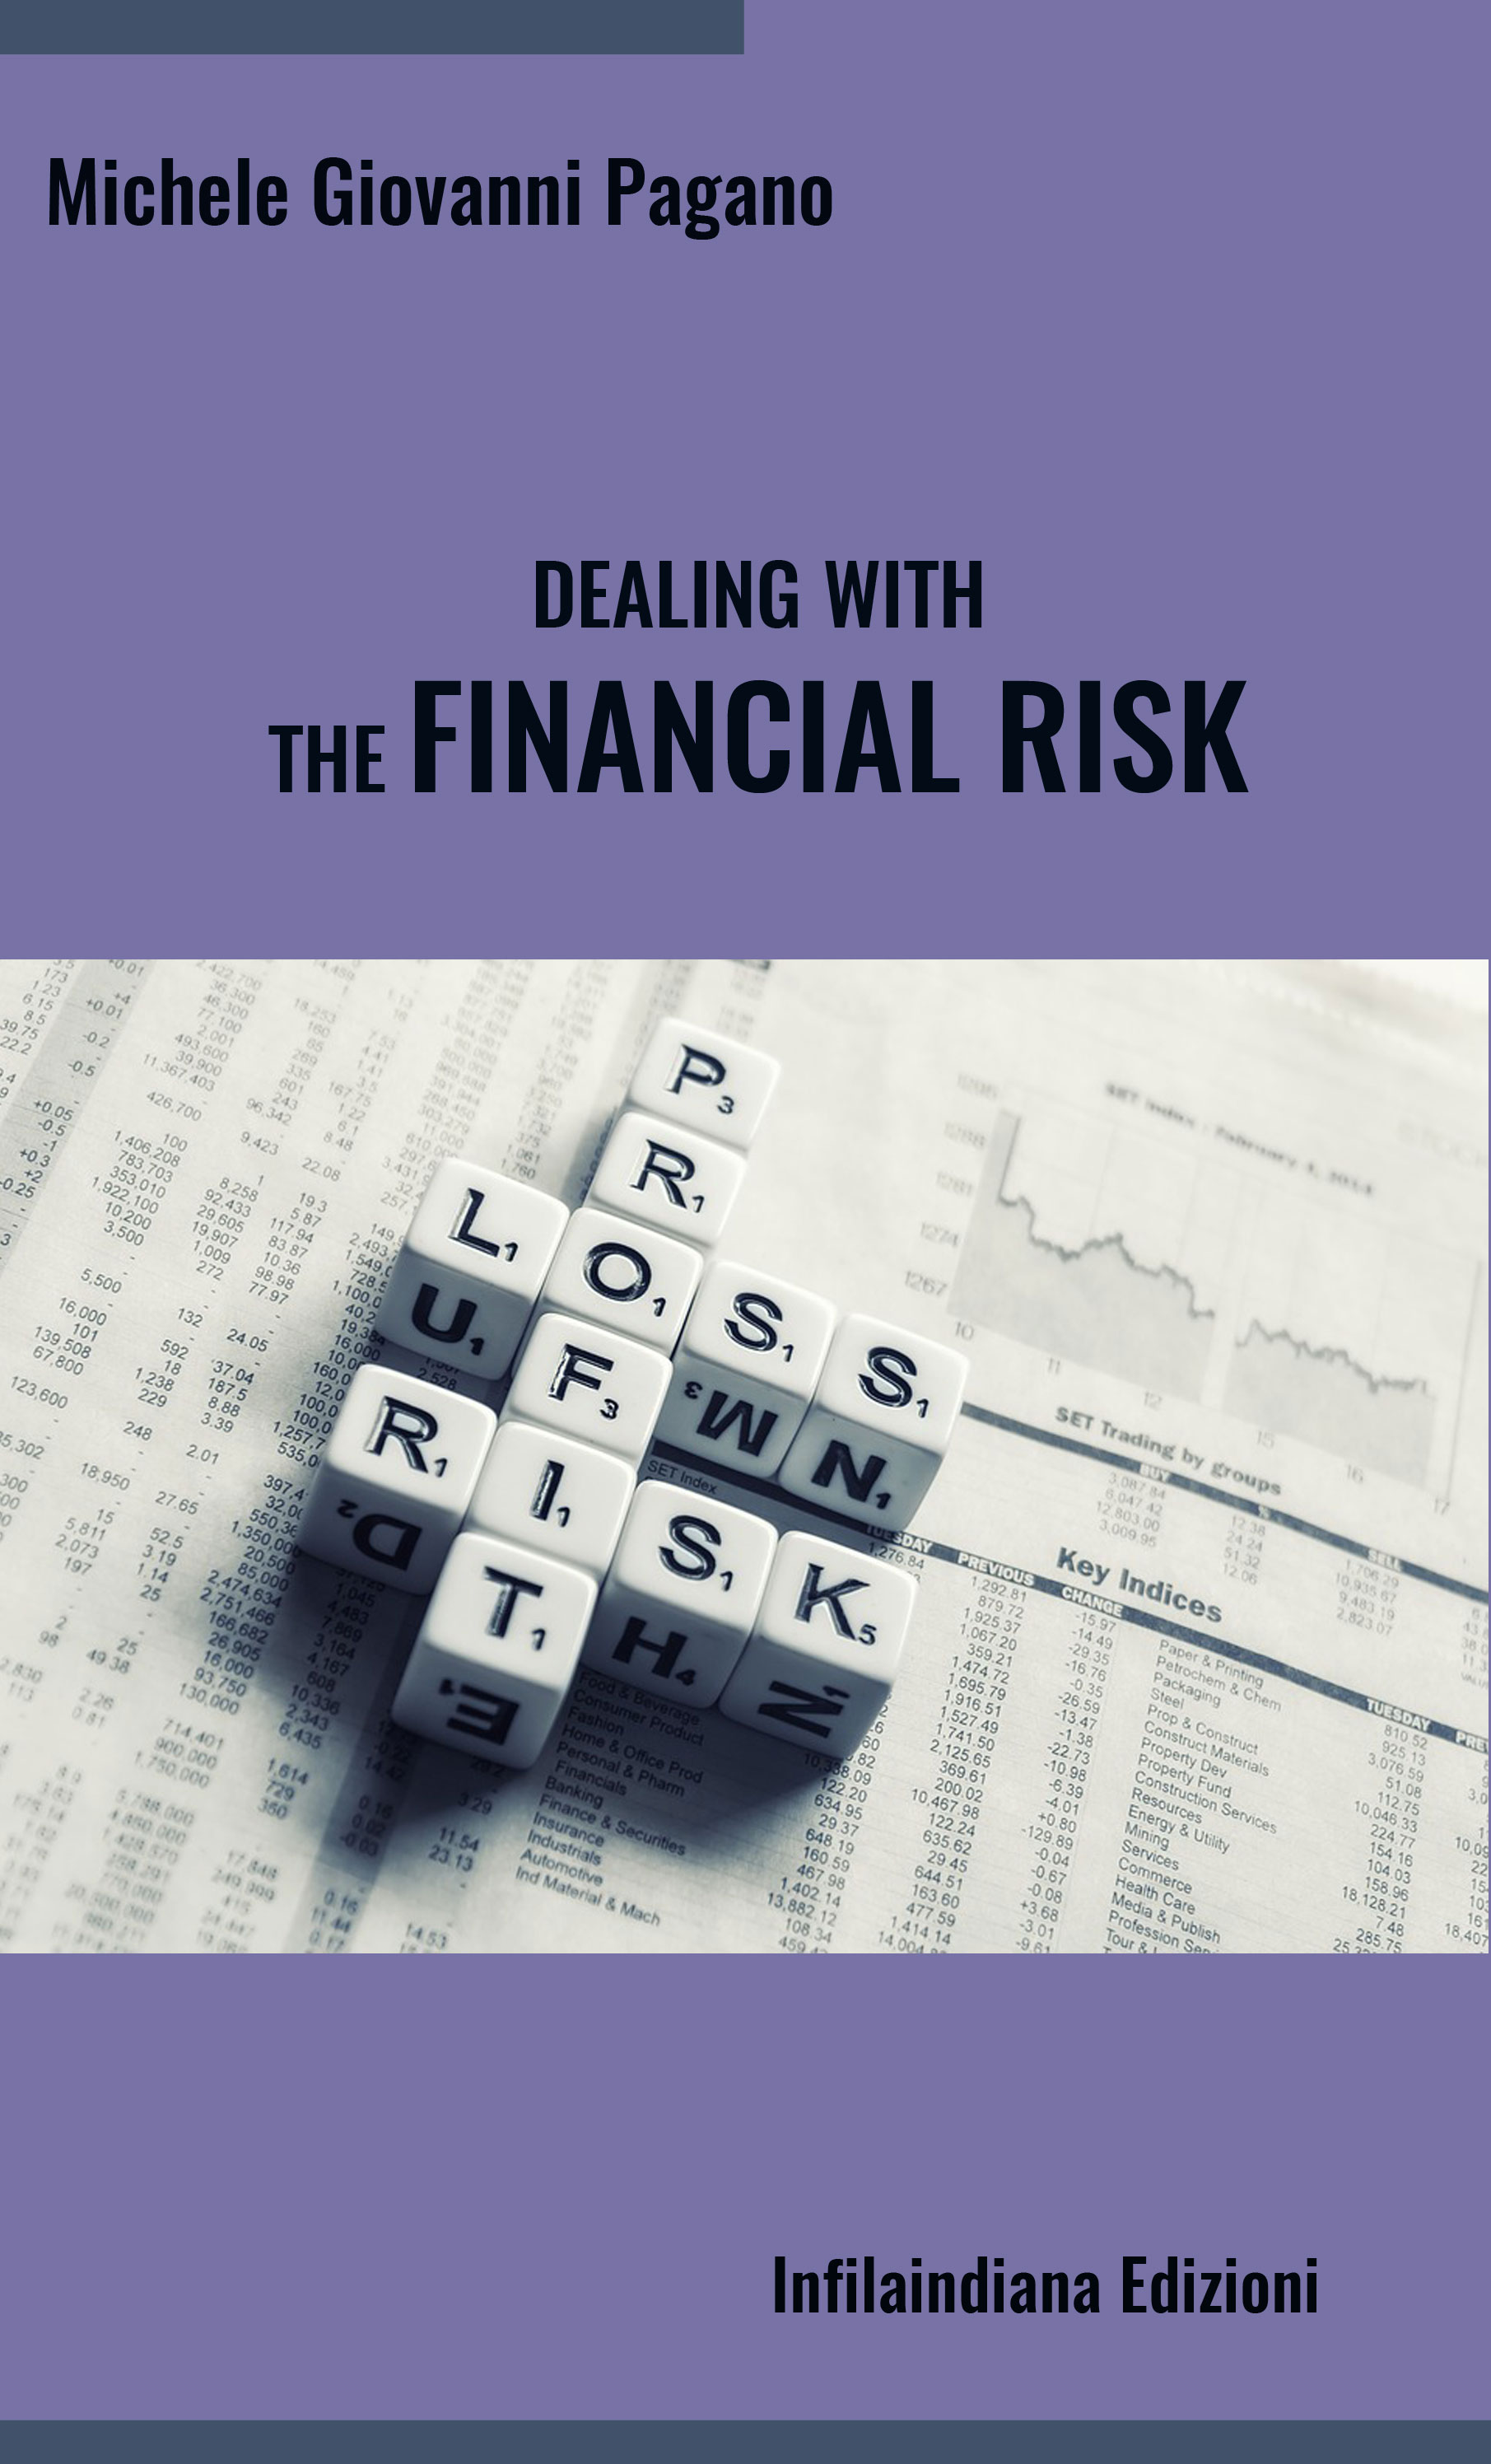  Dealing with the Financial Risk)